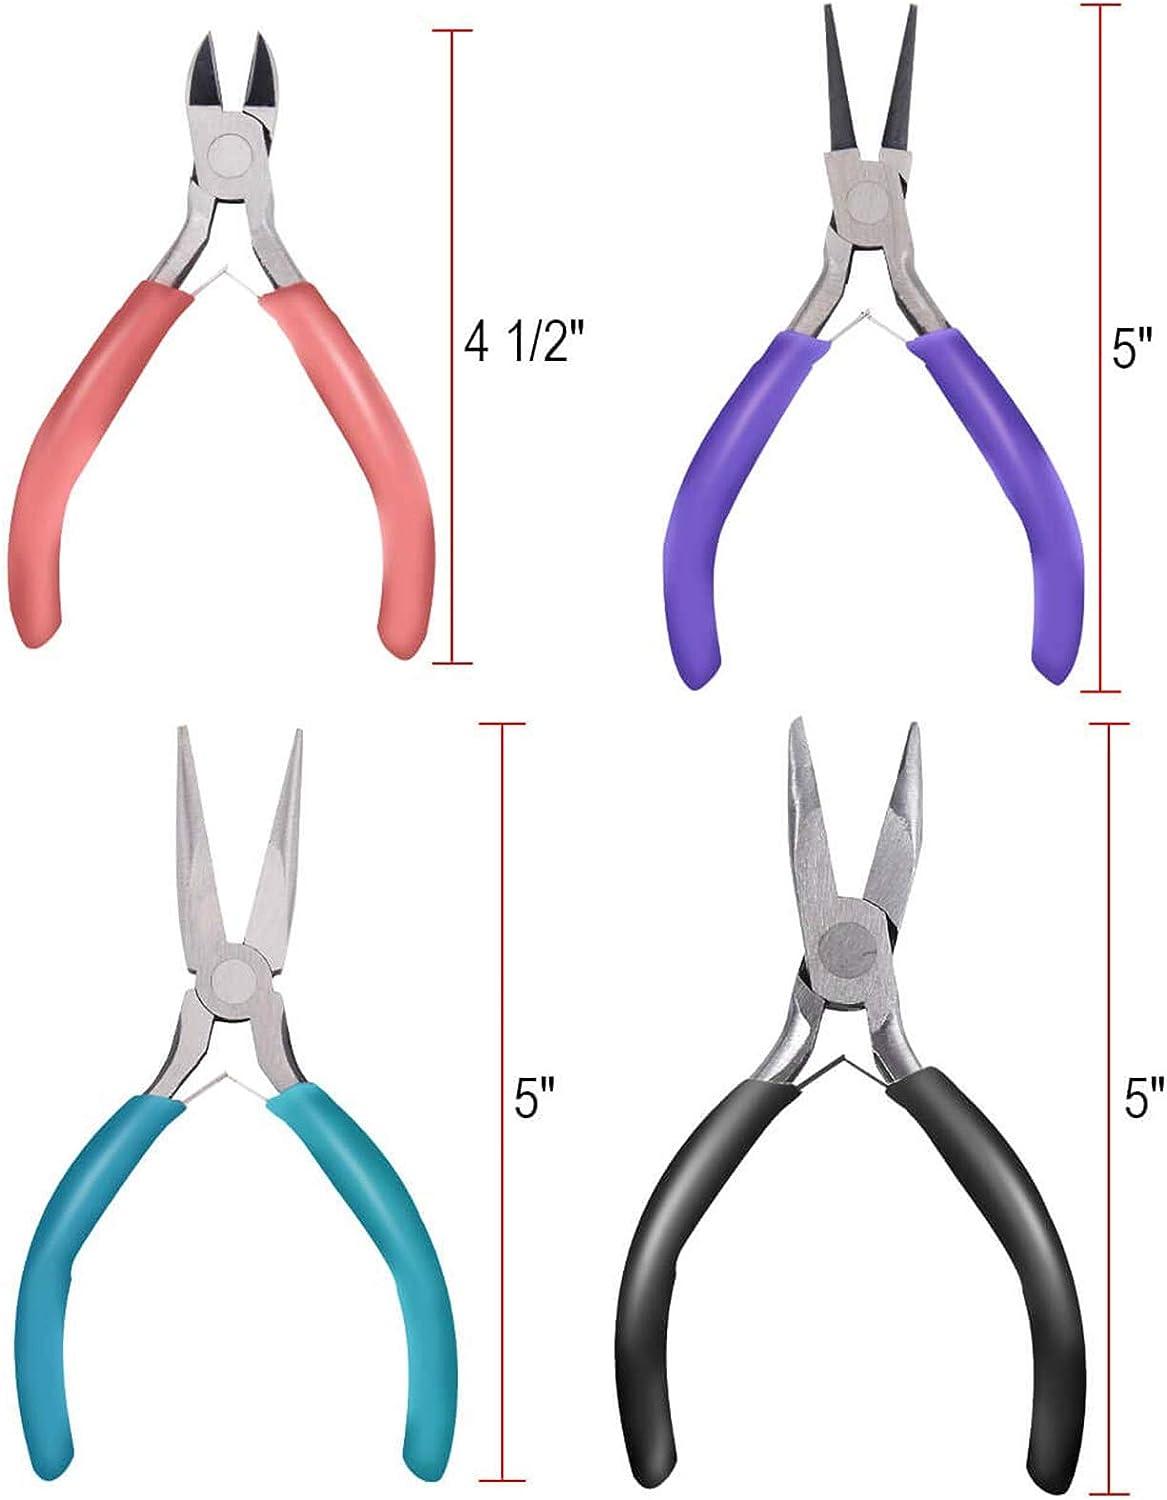 Anezus 4Pcs Jewelry Pliers Tool Set Includes Needle Round Wire Cutters and  Bent Nose Pliers for Jewelry Beading Repair Making Supplies